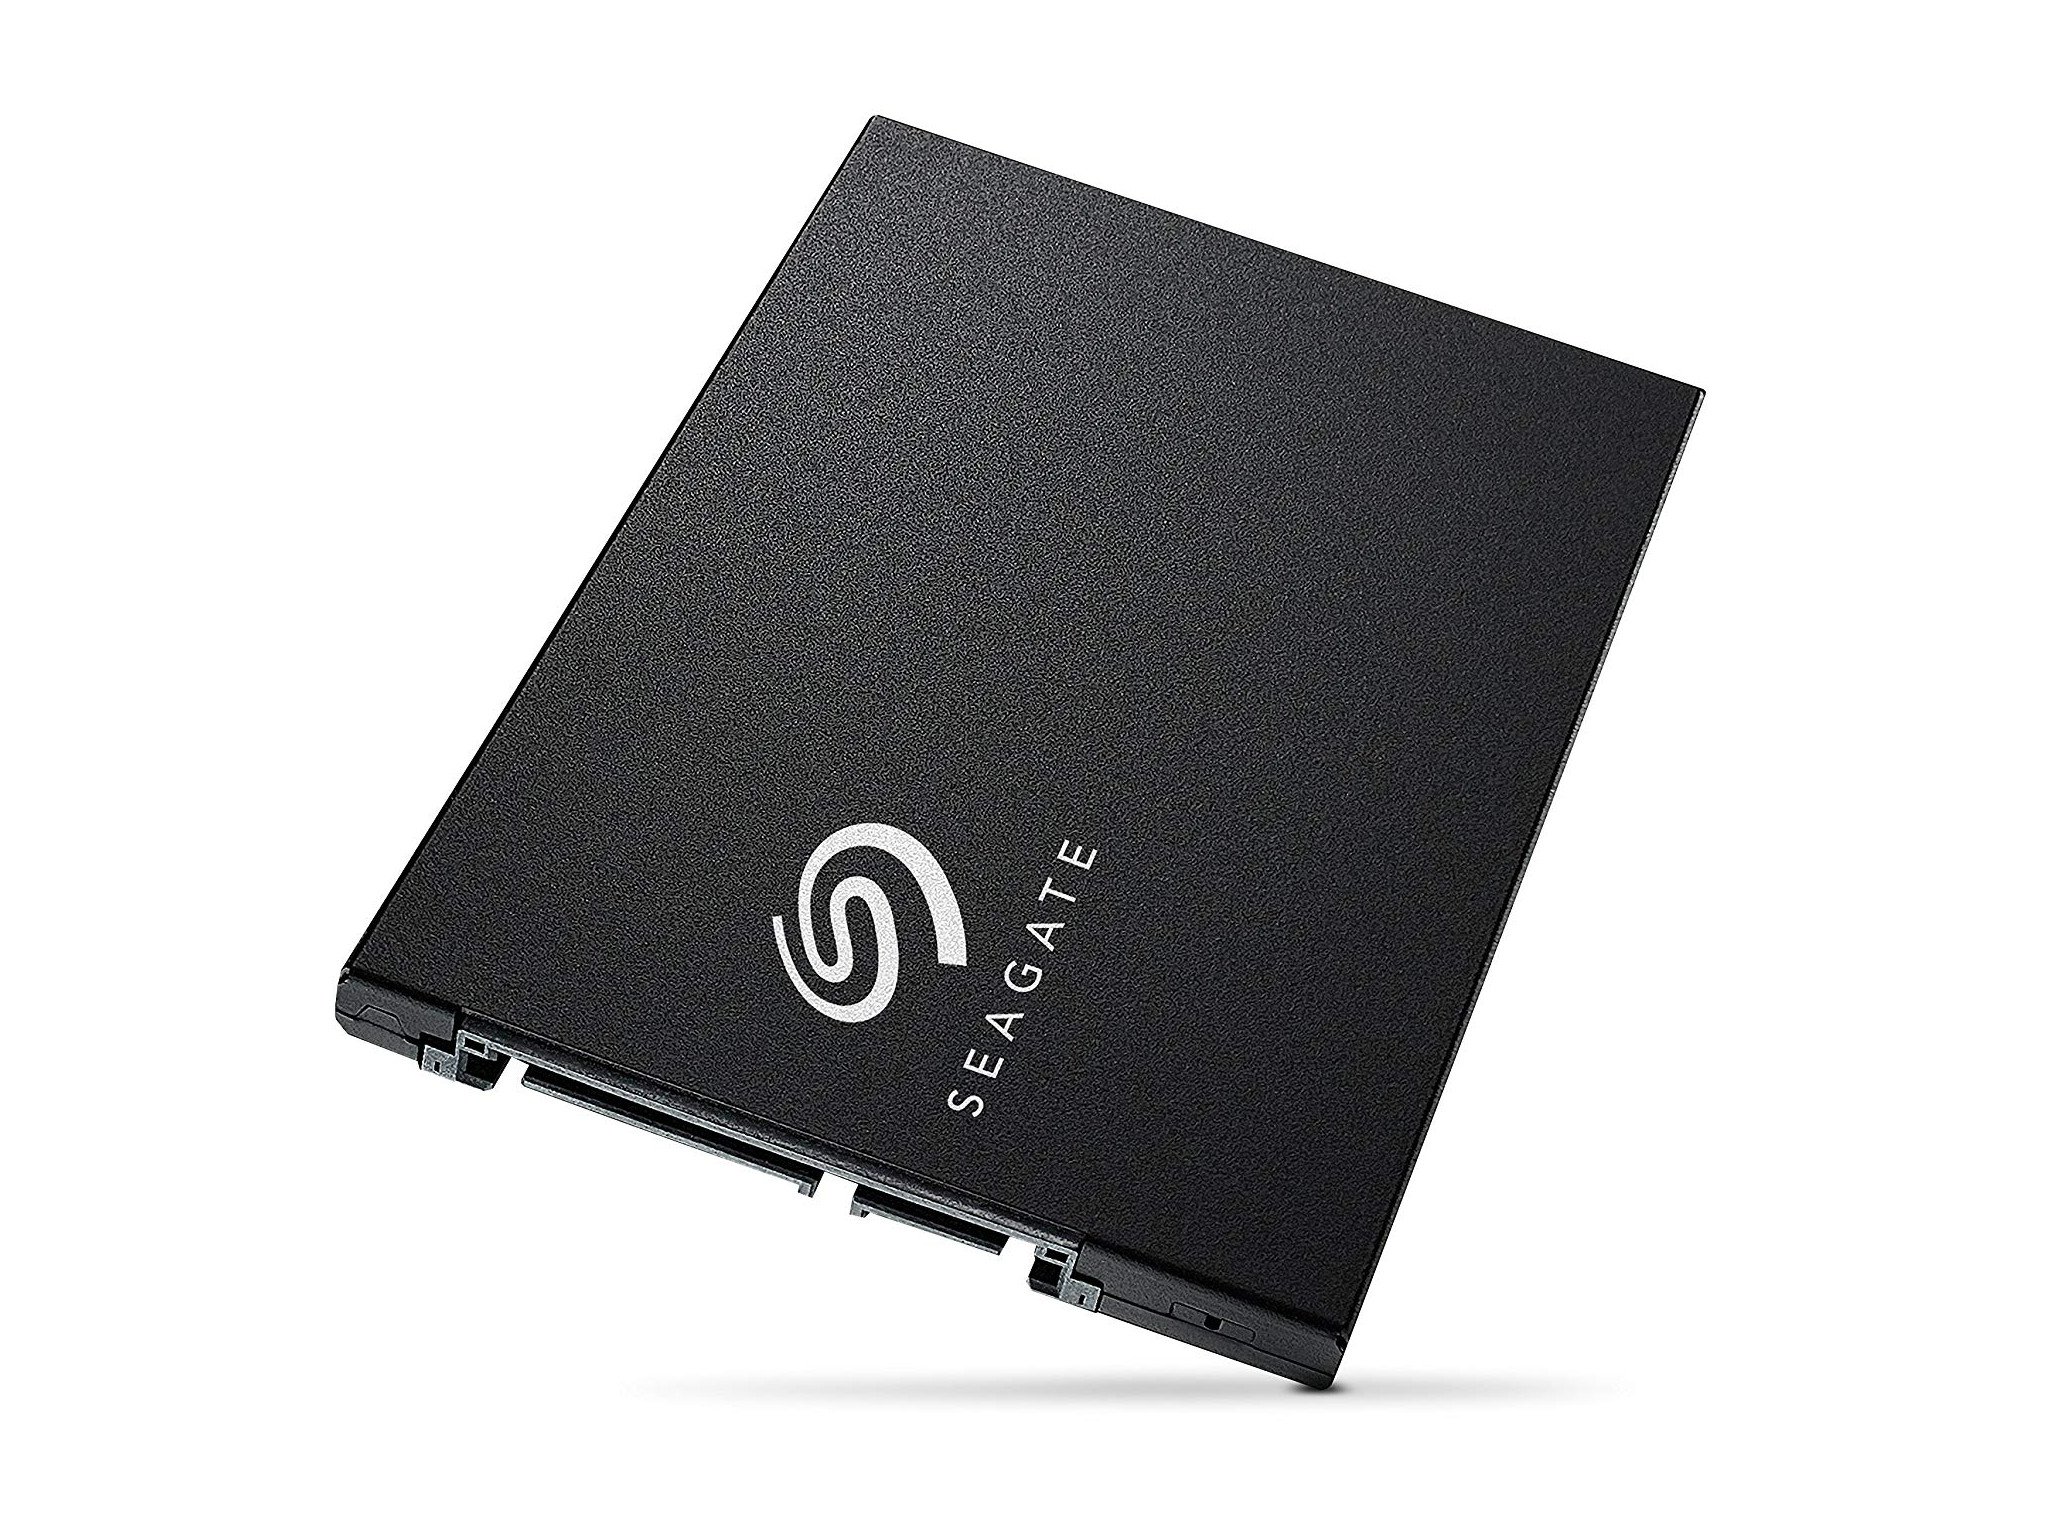 Seagate launches new BarraCuda SSDs starting at $79.99